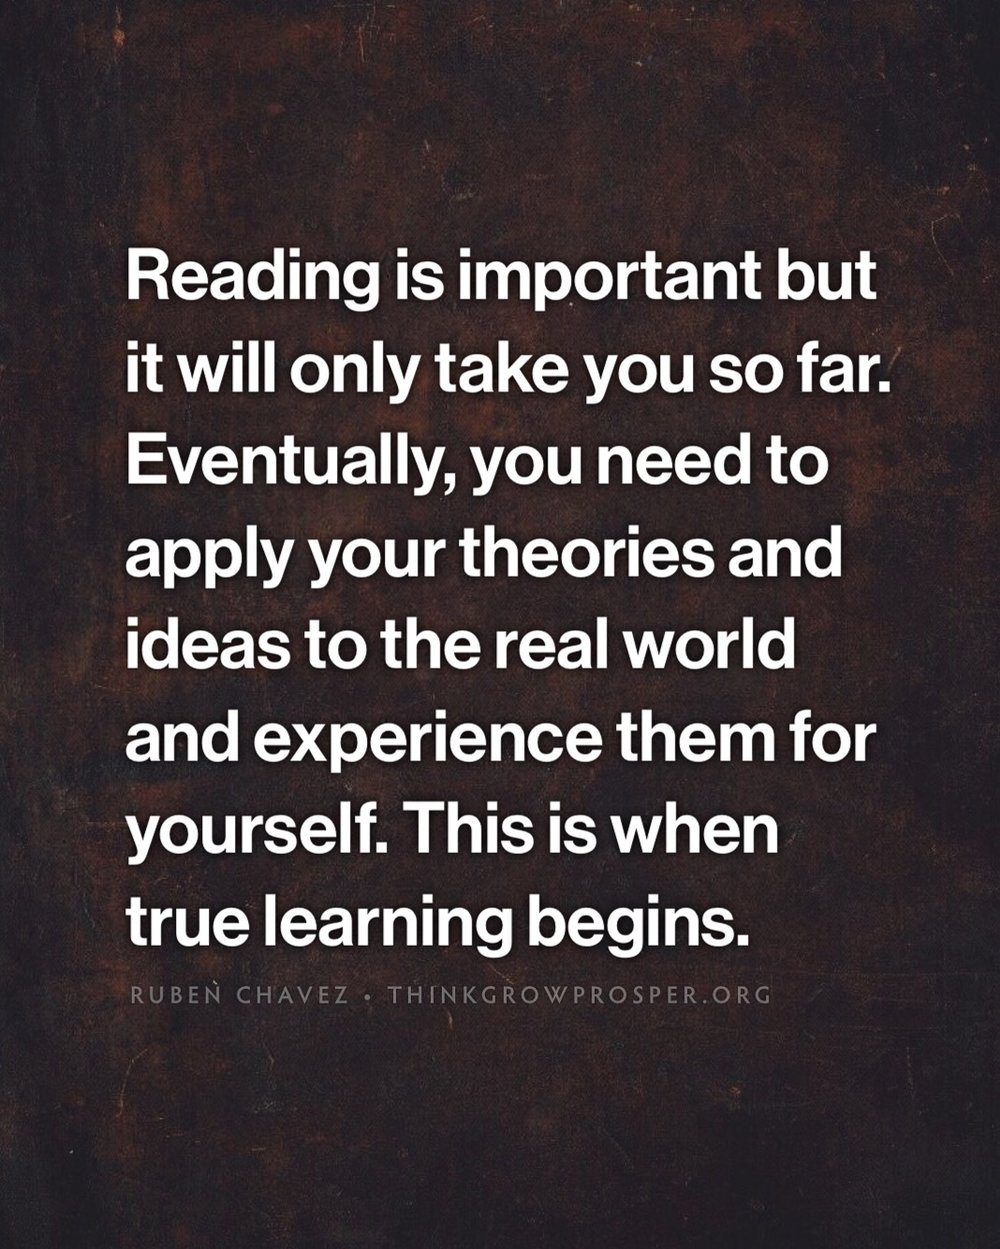 paragraph on real learning through experience